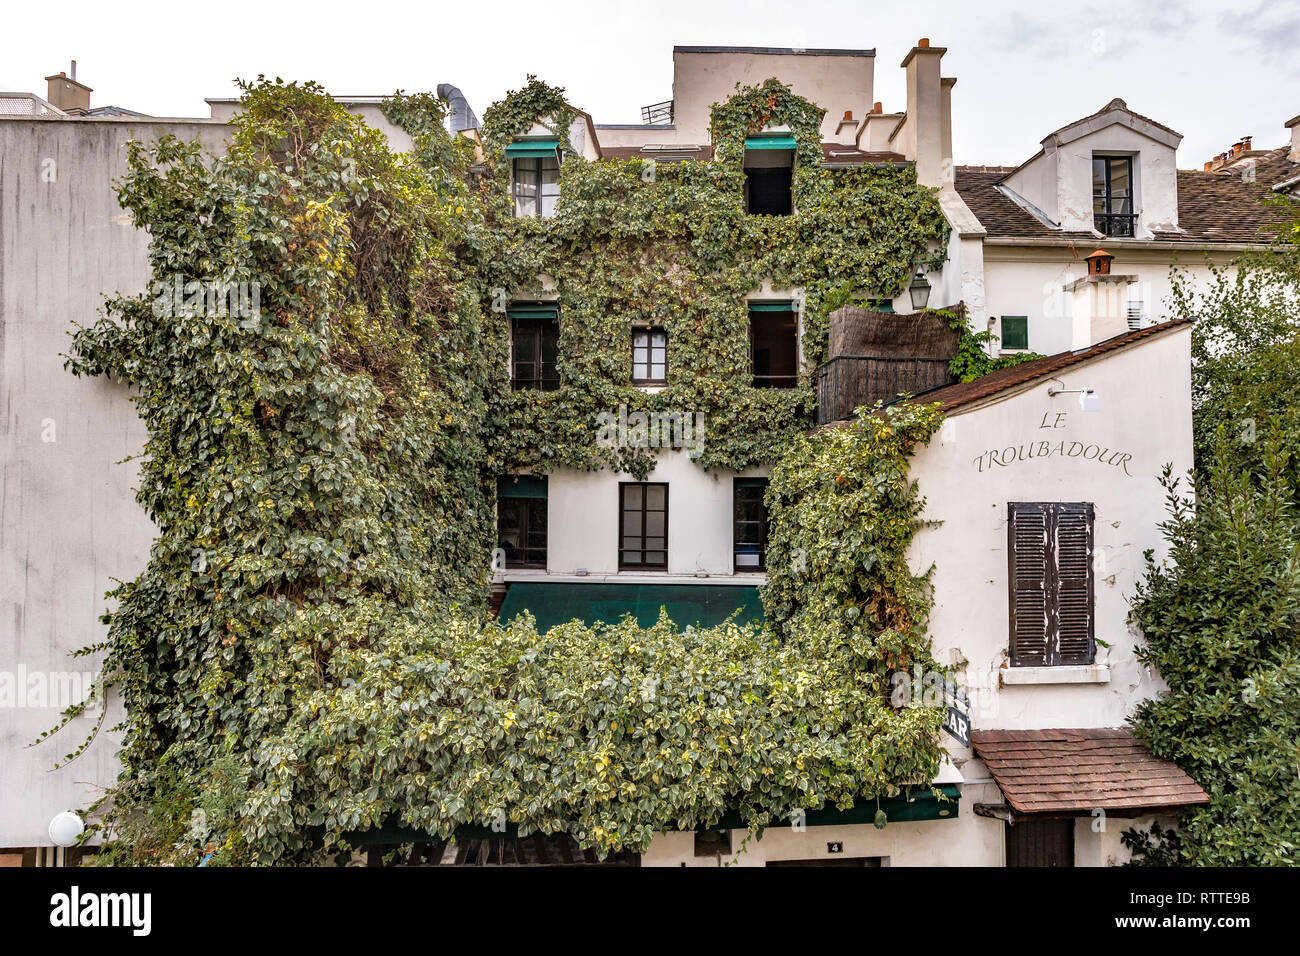 Ivy growing on the wall of a house in Montmartre which houses the Le Troubadour restaurant cafe ,Paris,France Stock Photo